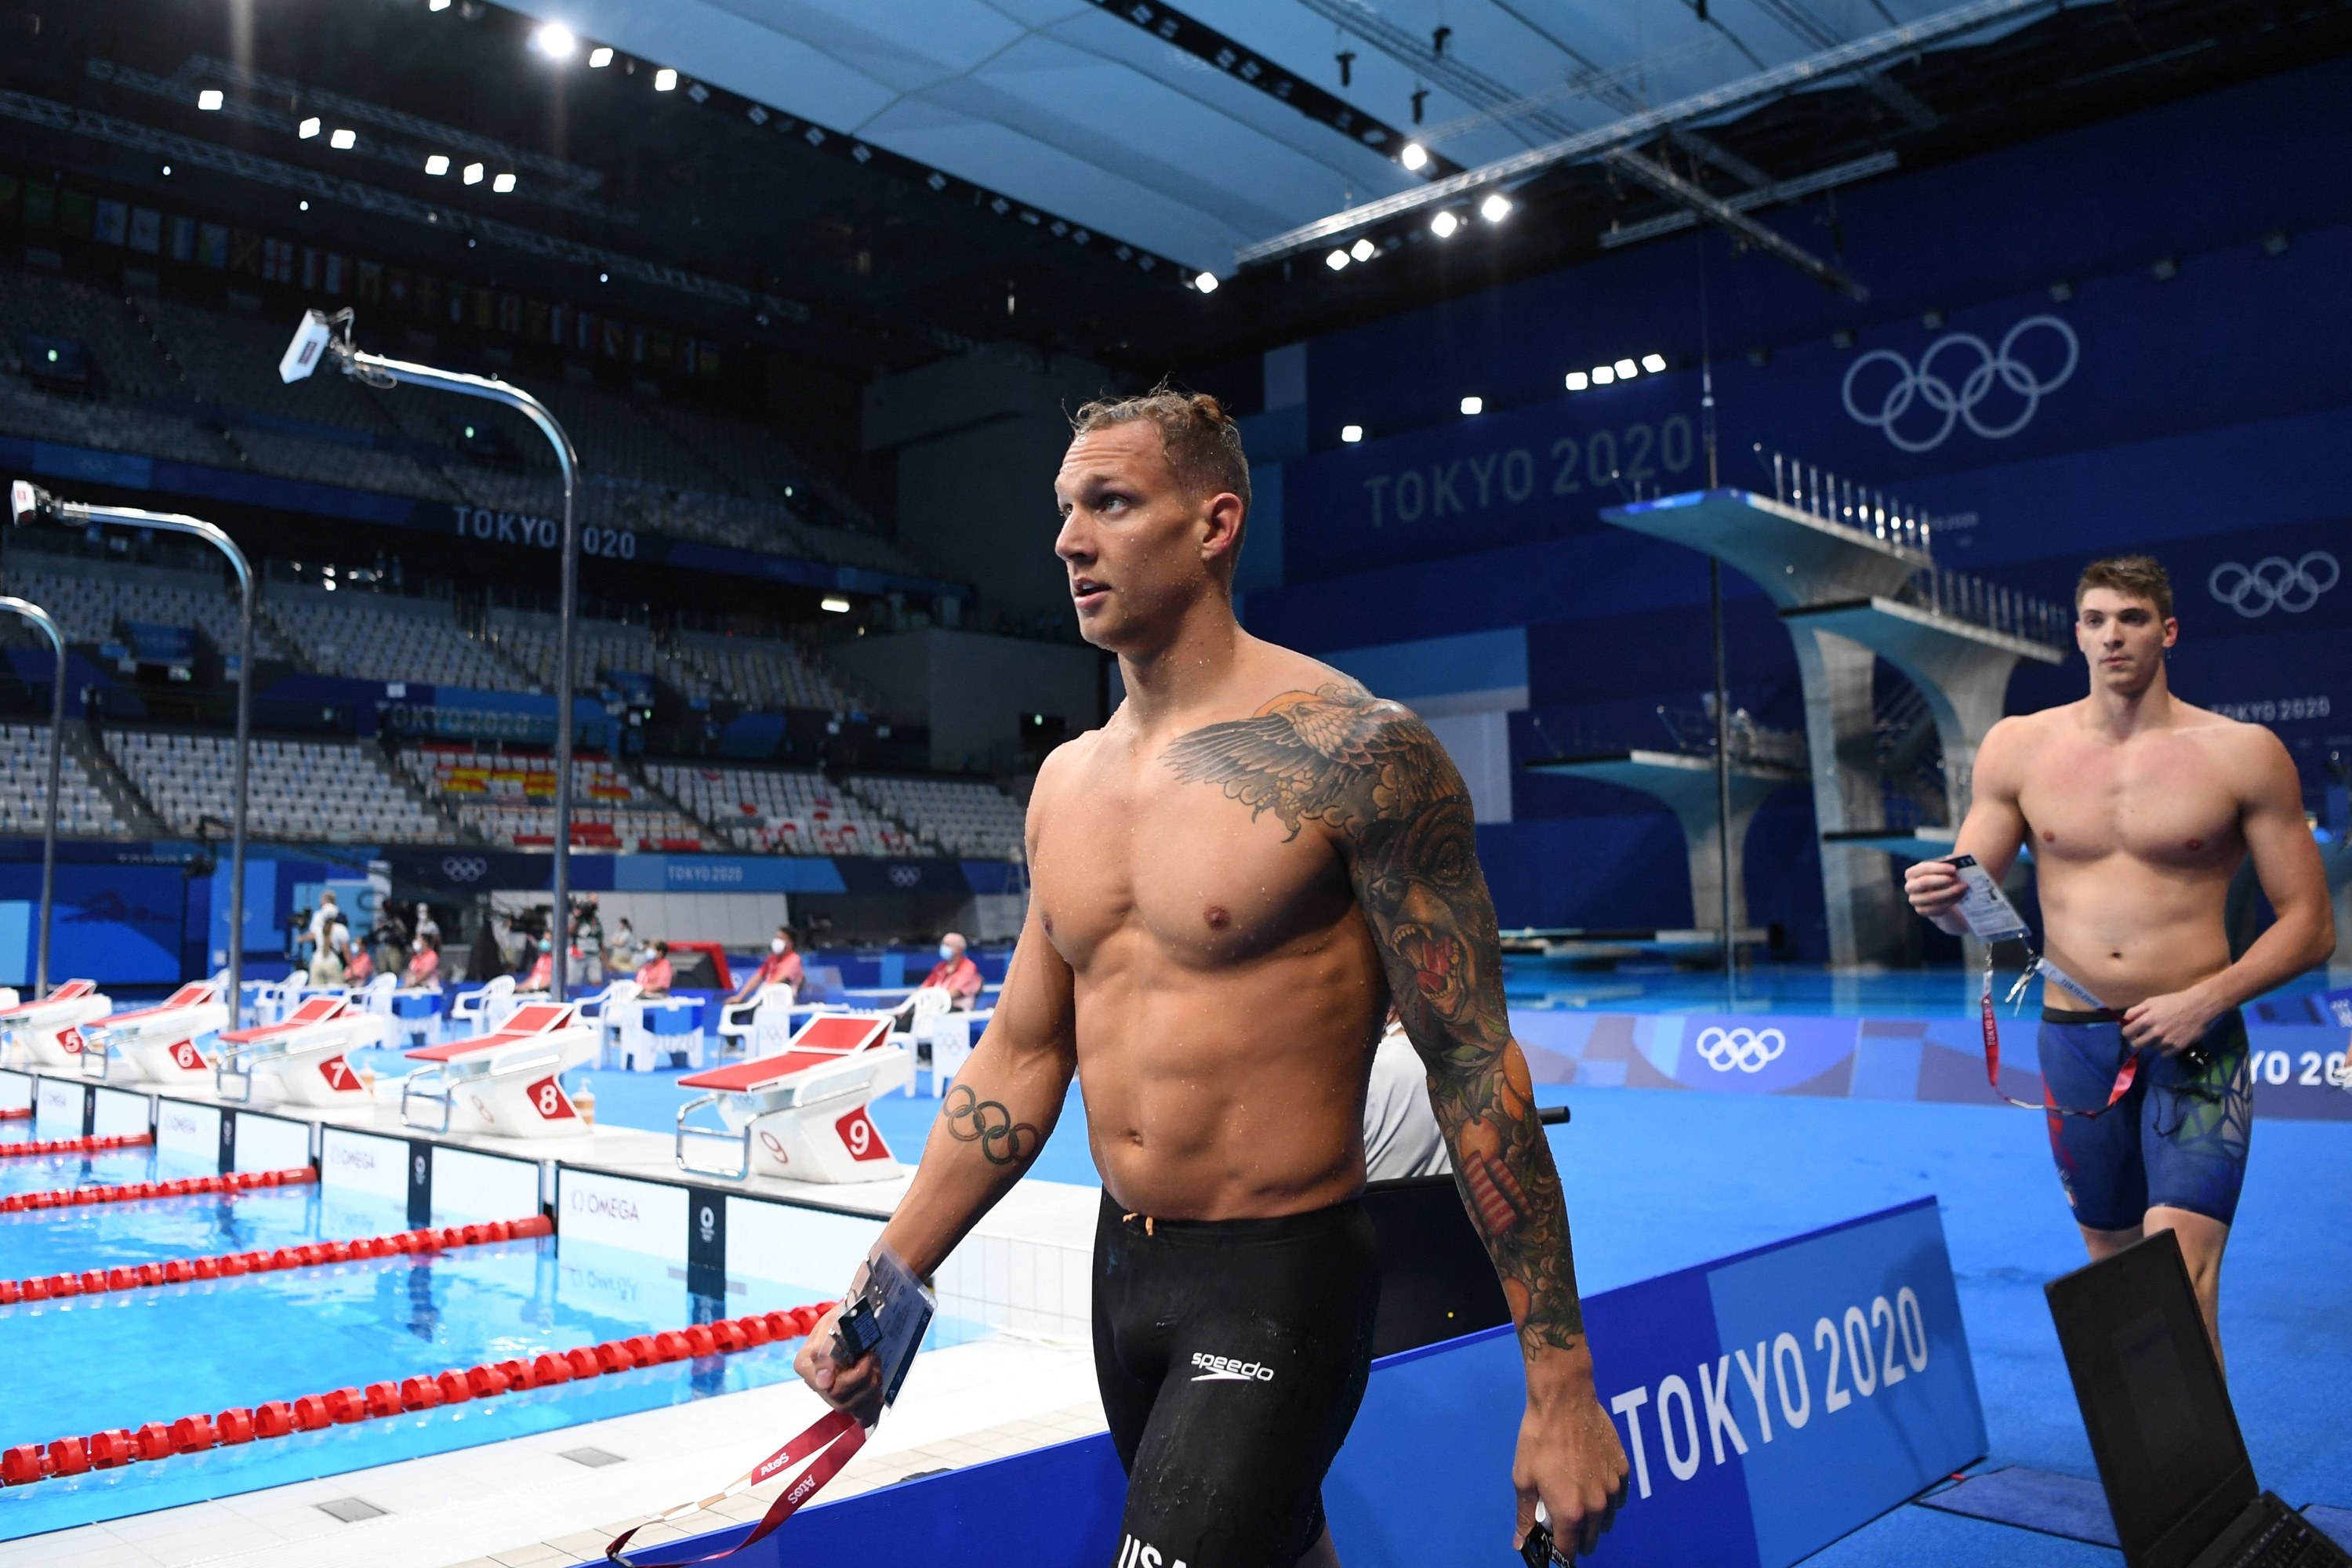 American male swimmer exits the pool area at the Olympics